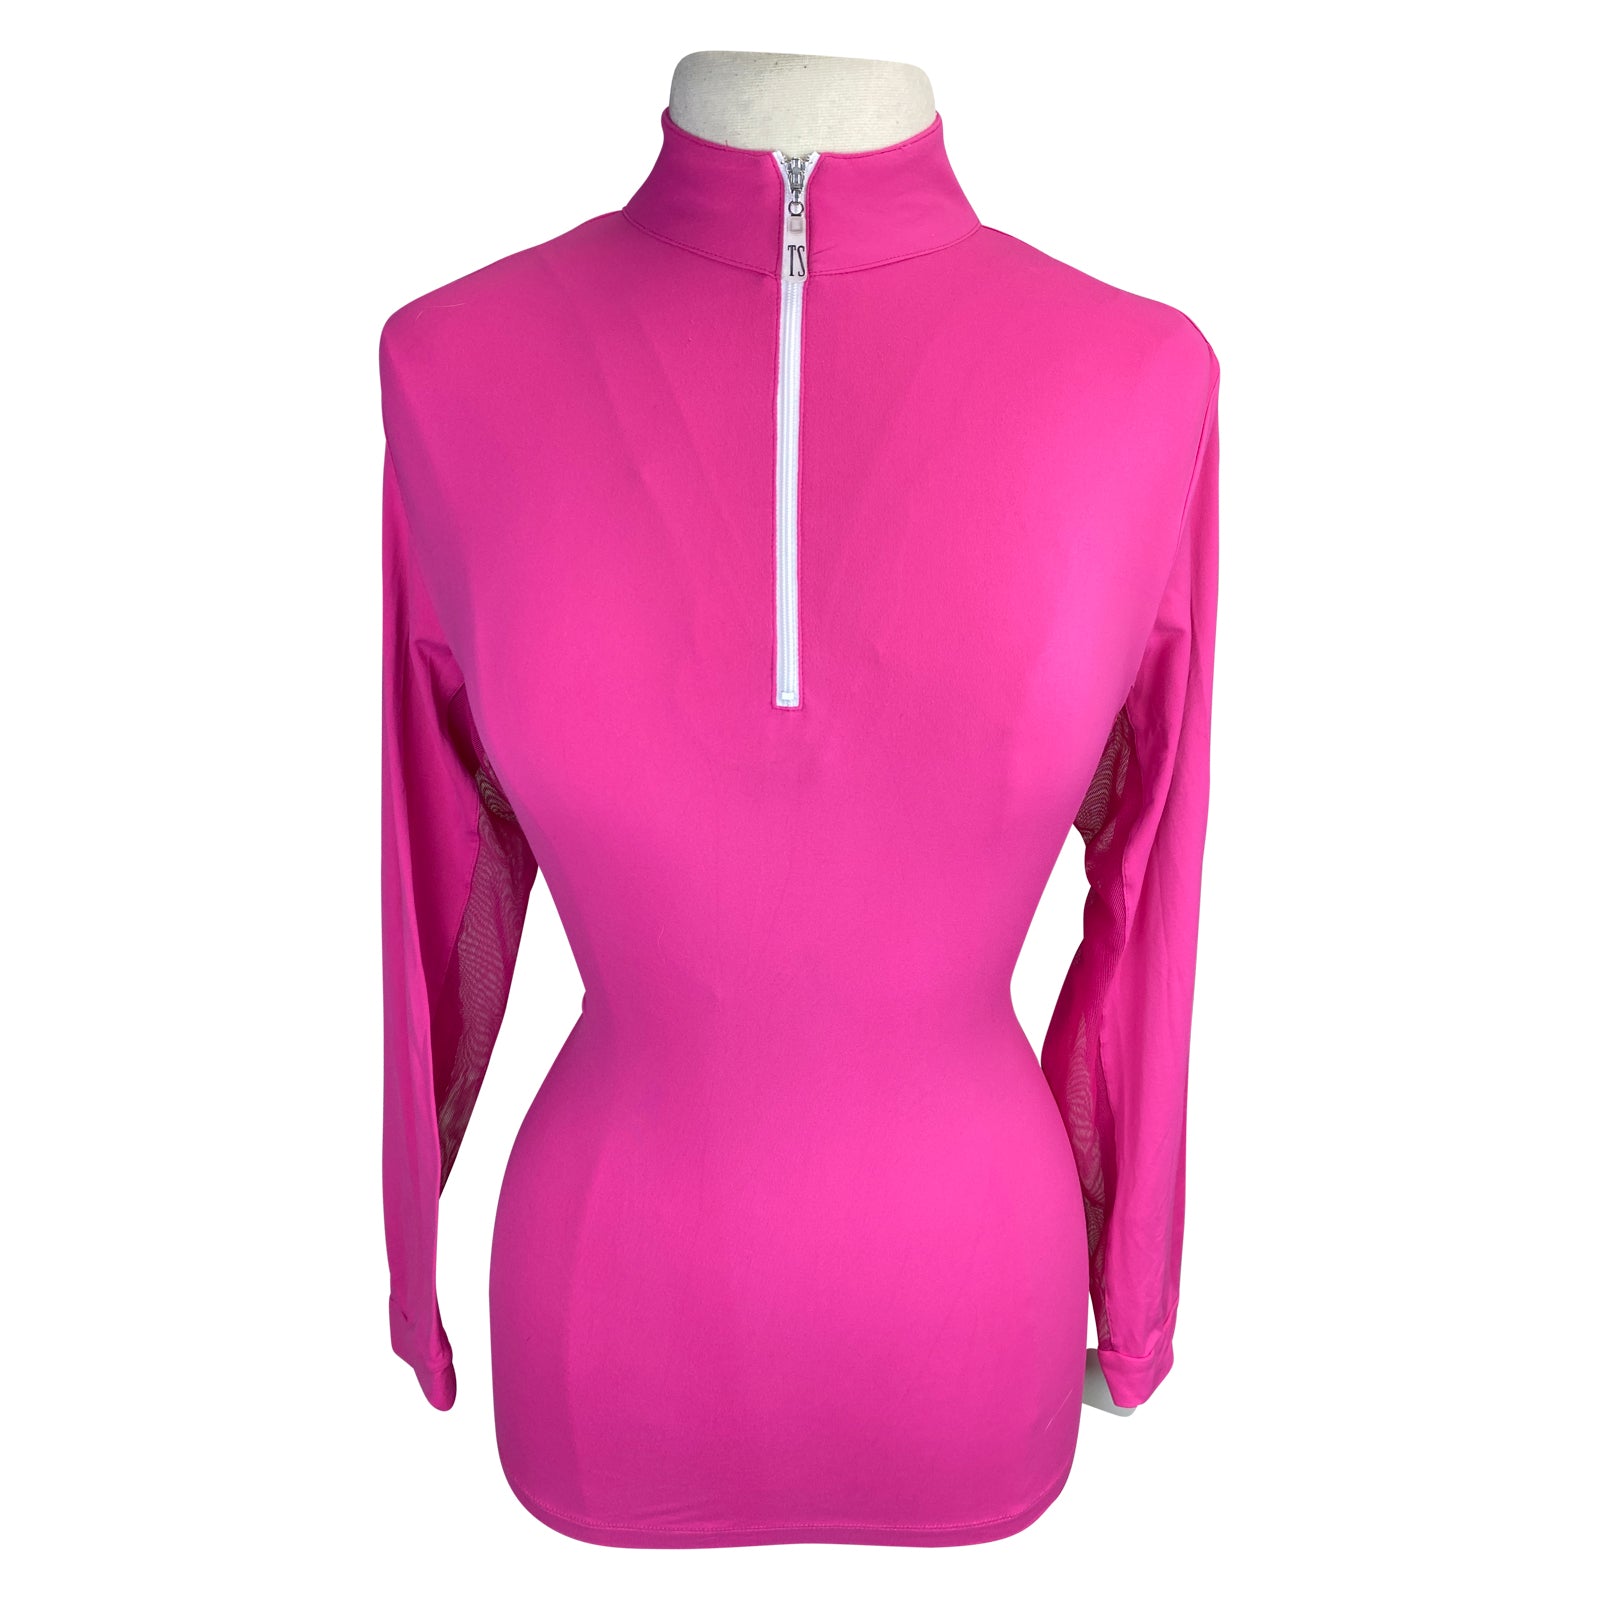 Front of Tailored Sportsman 'Ice Fil' Shirt in Hot Pink